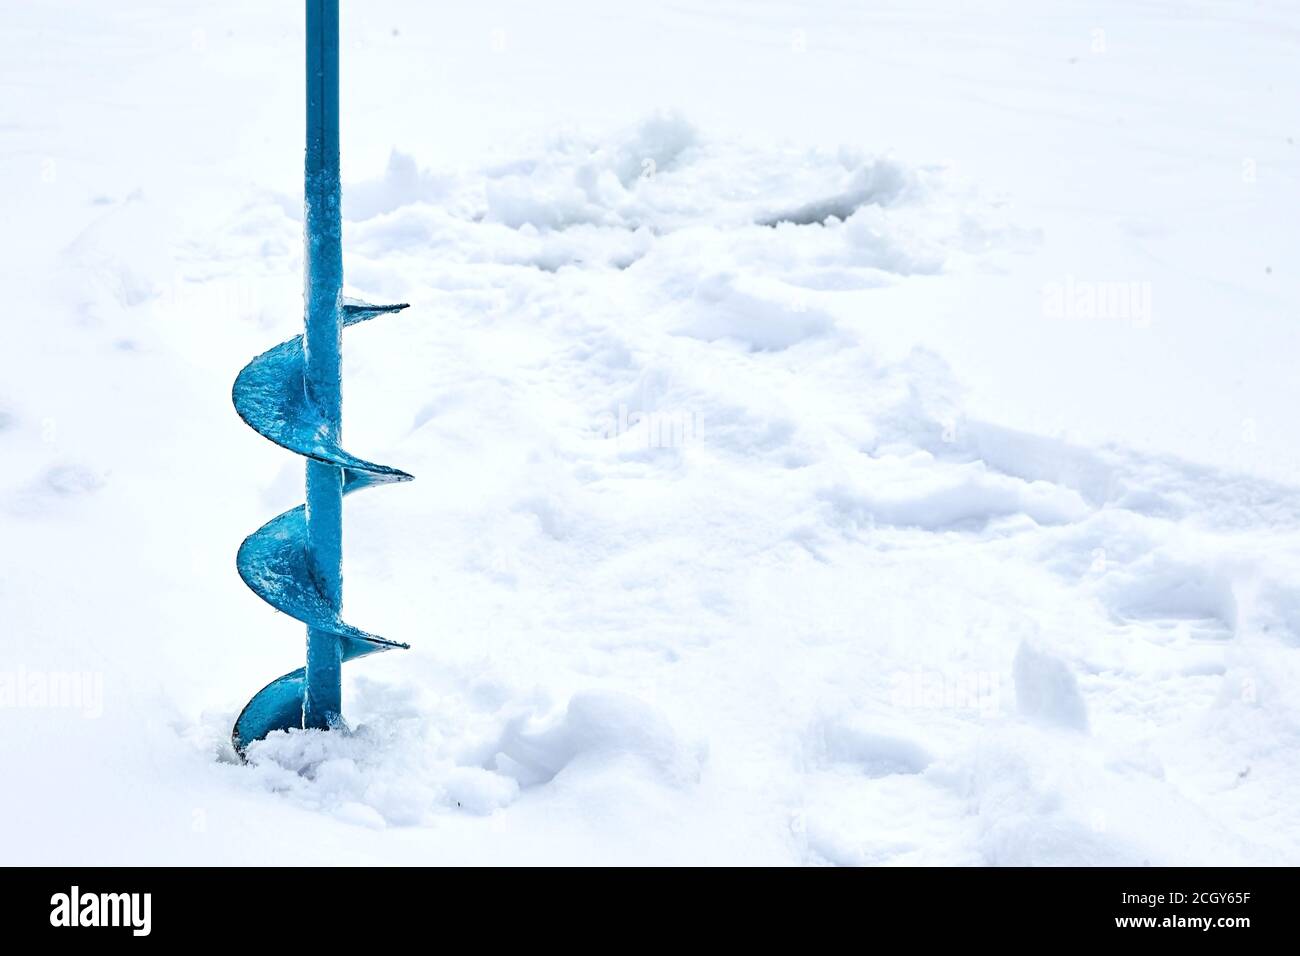 Hand operated ice auger used in ice fishing. Blue Metal Screw